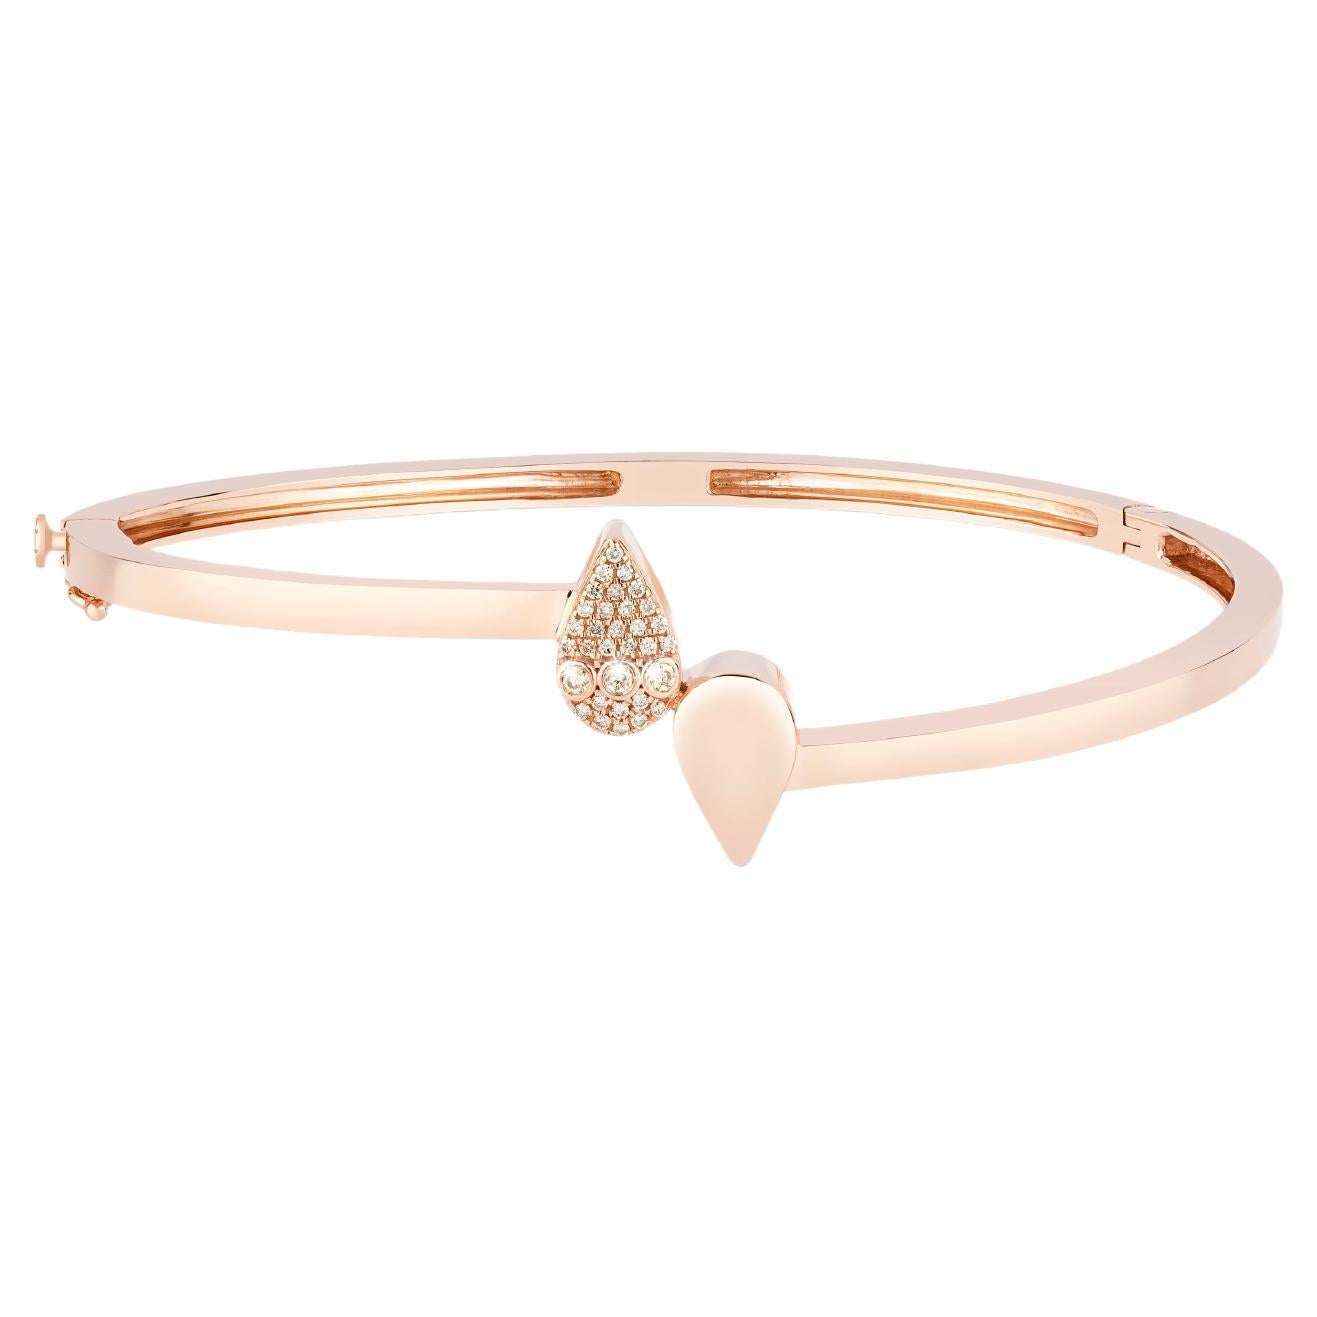 18k rose gold bangle with diamond encrusted drop size M/L